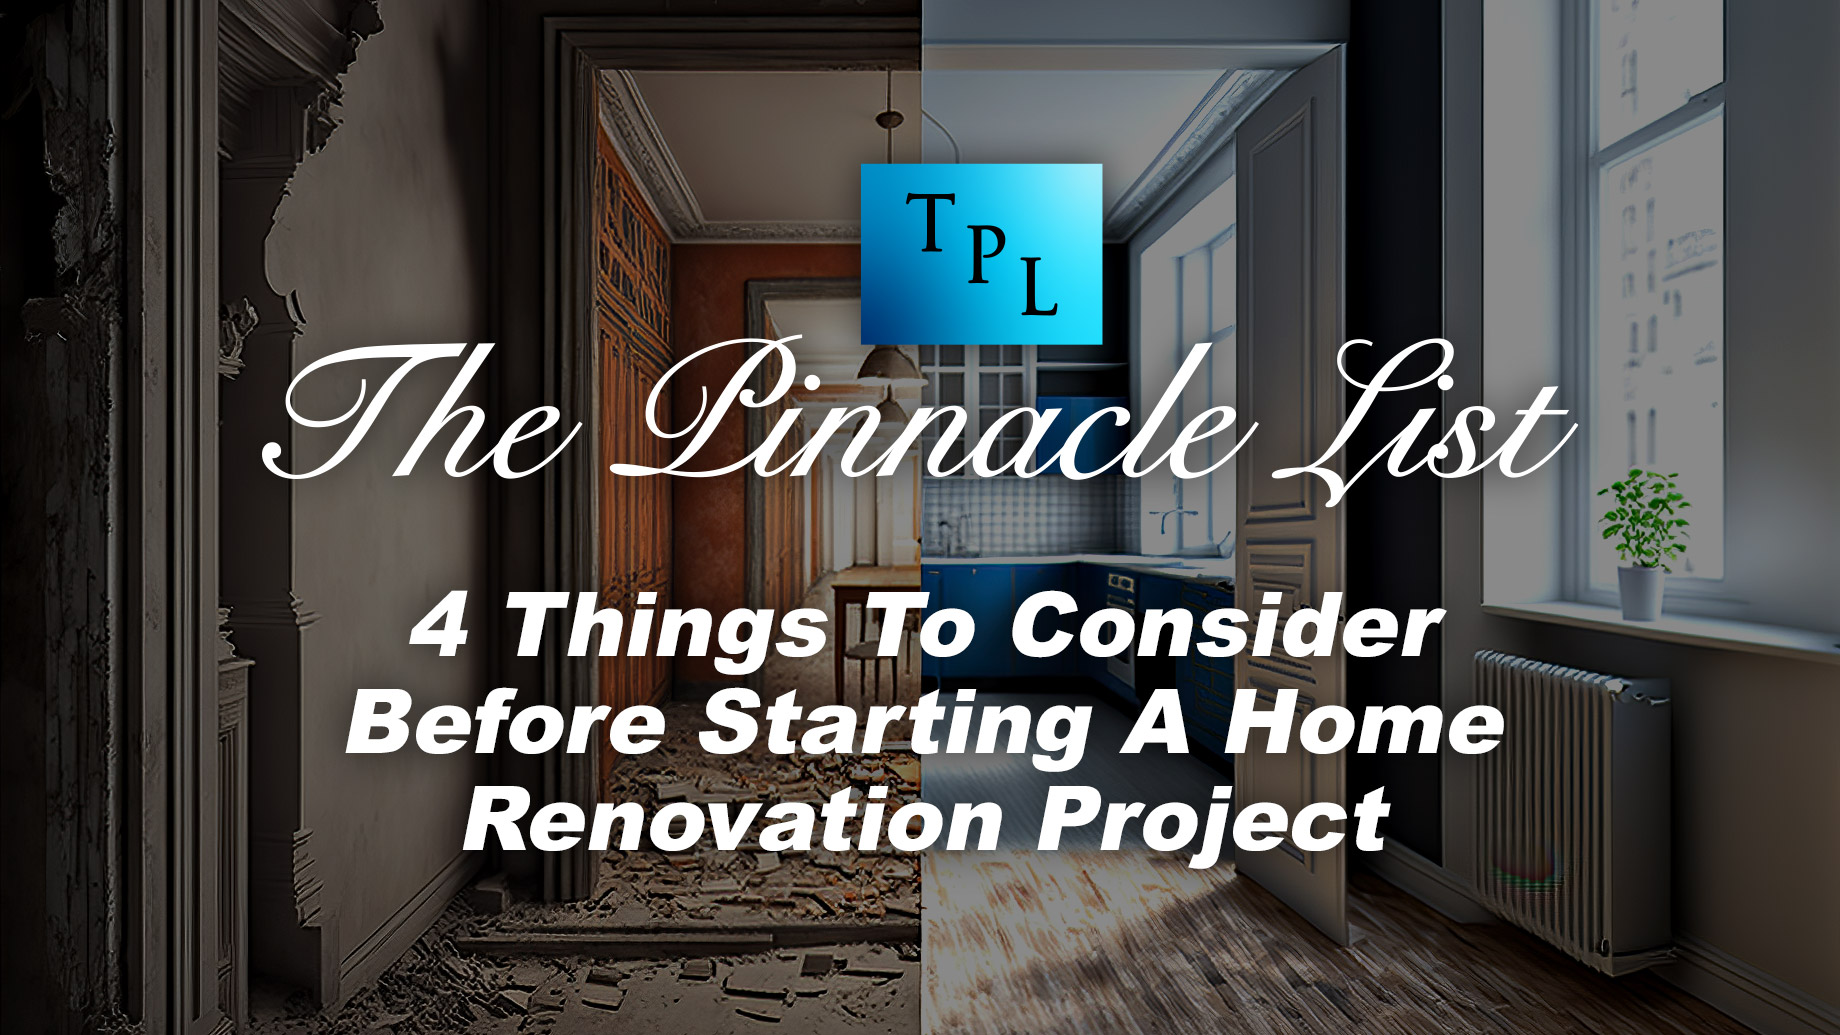 4 Things To Consider Before Starting A Home Renovation Project